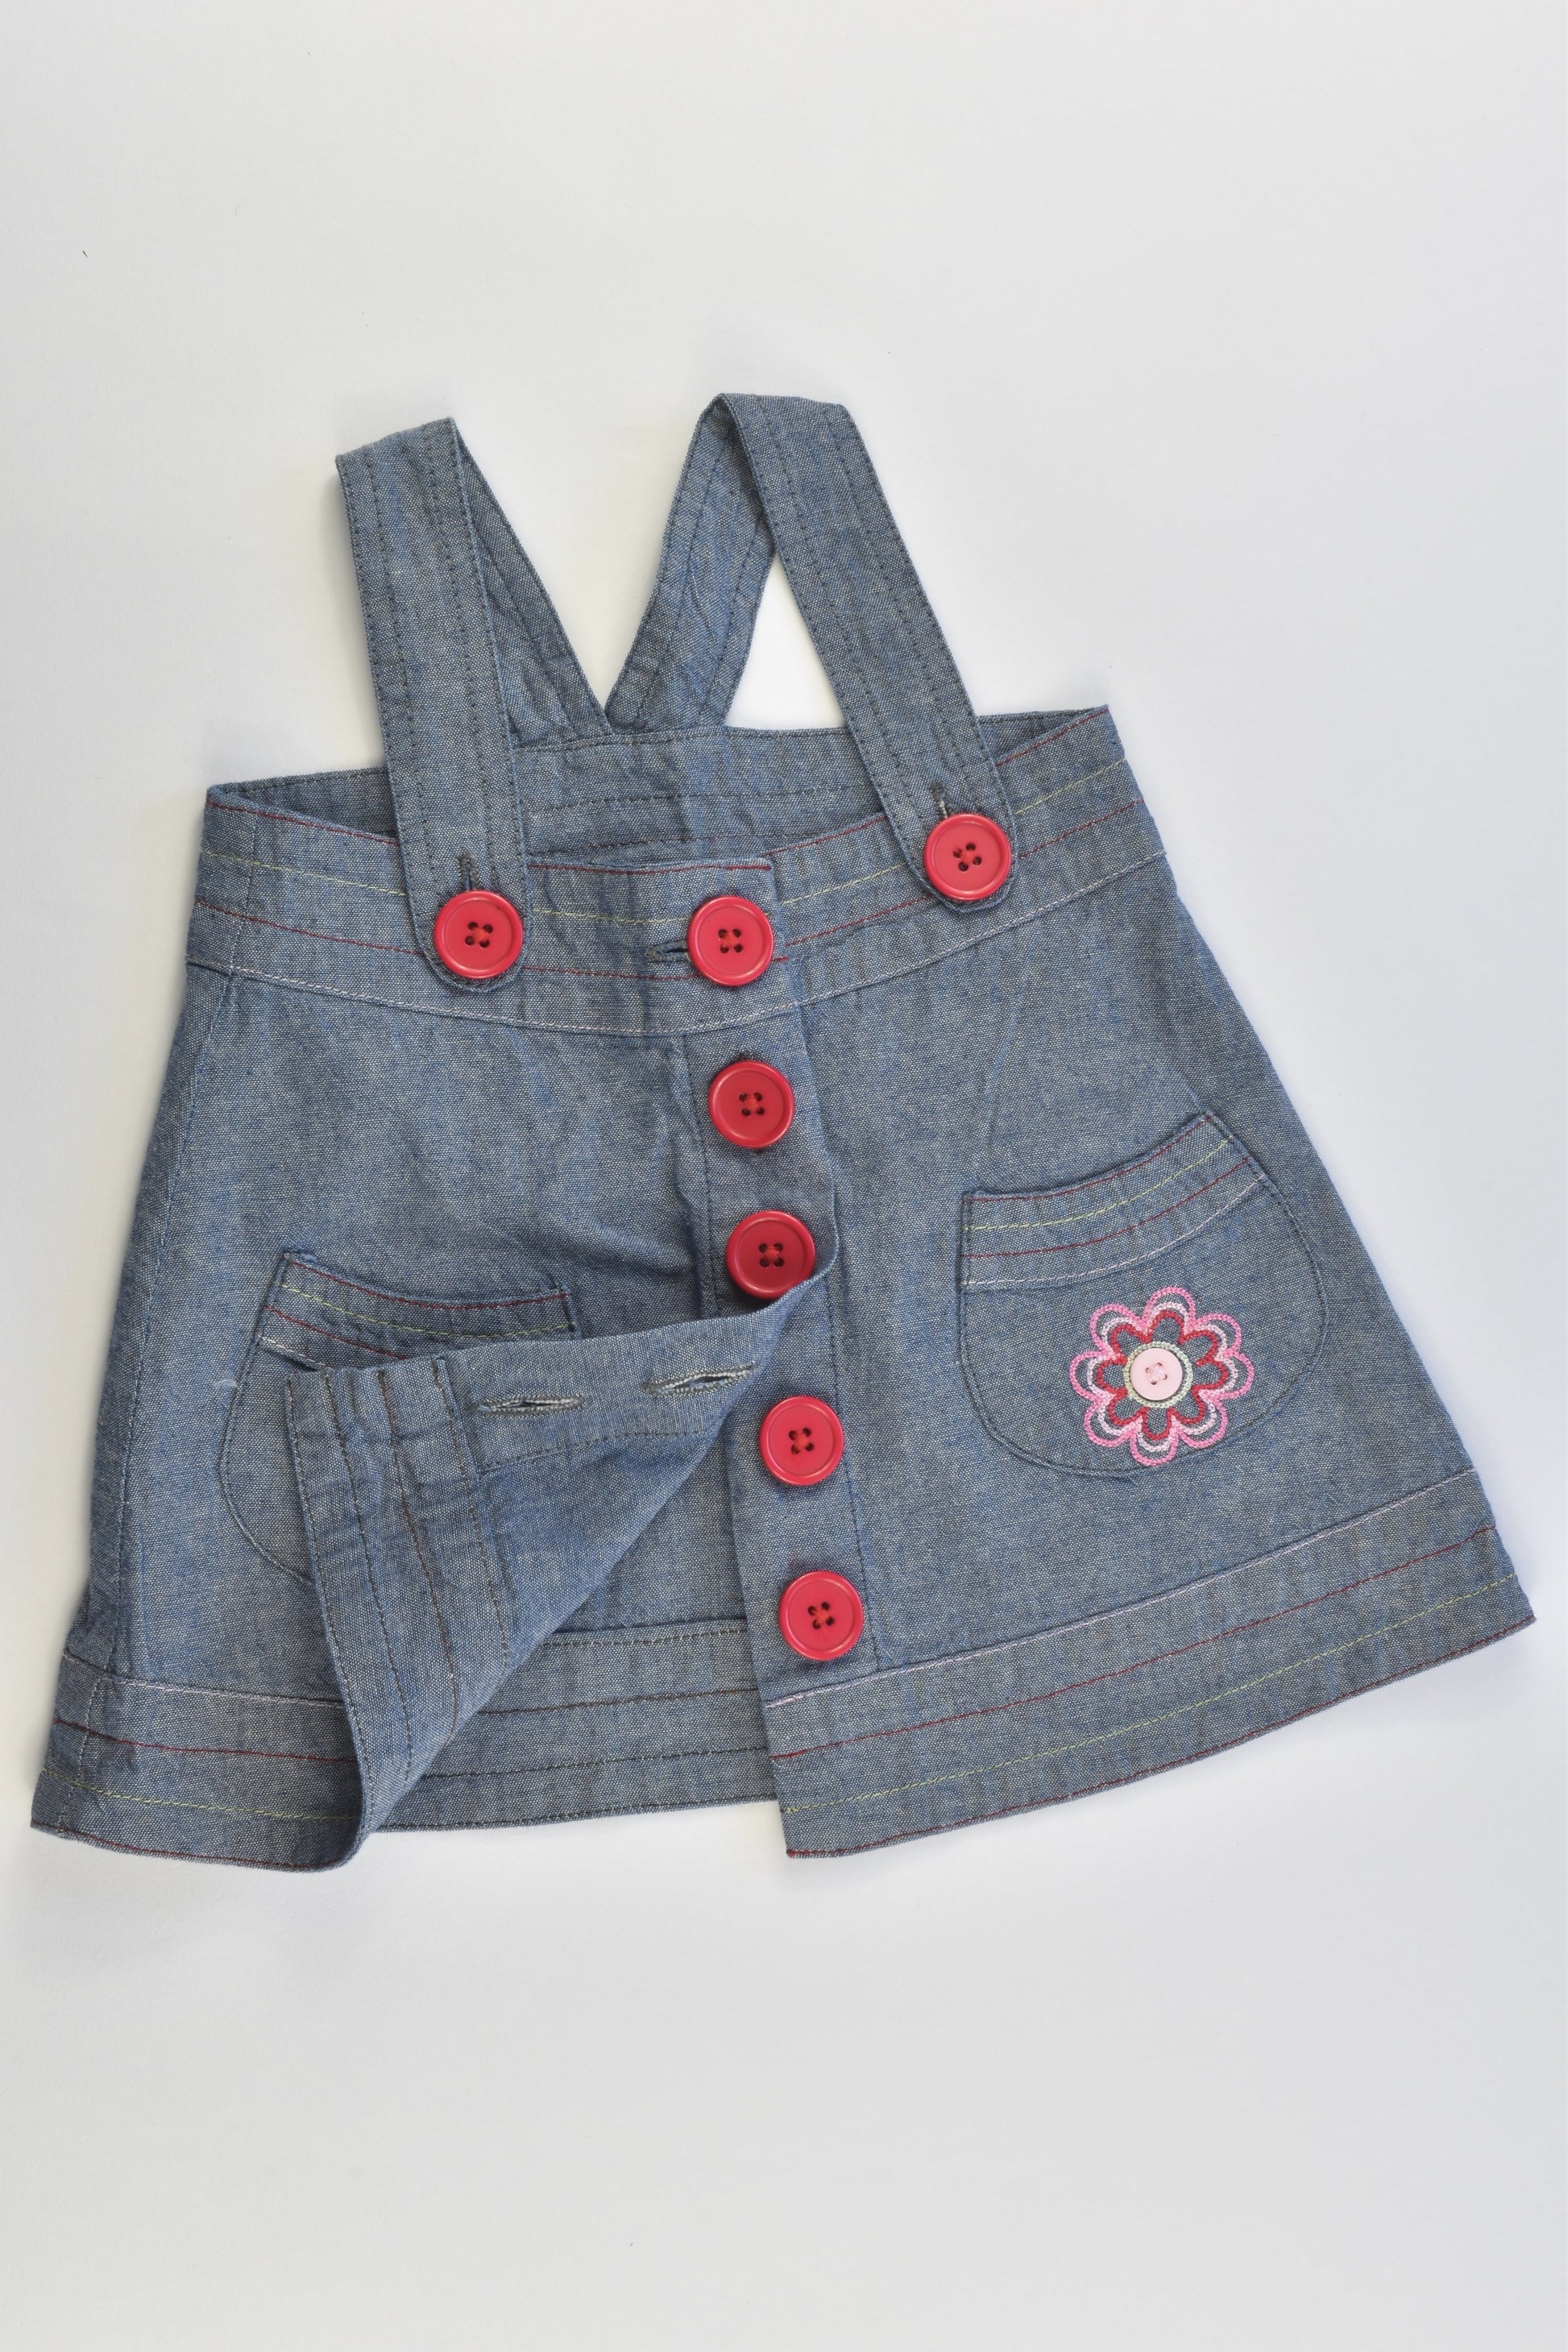 NEW Sprout Size 000 Soft Denim Dress